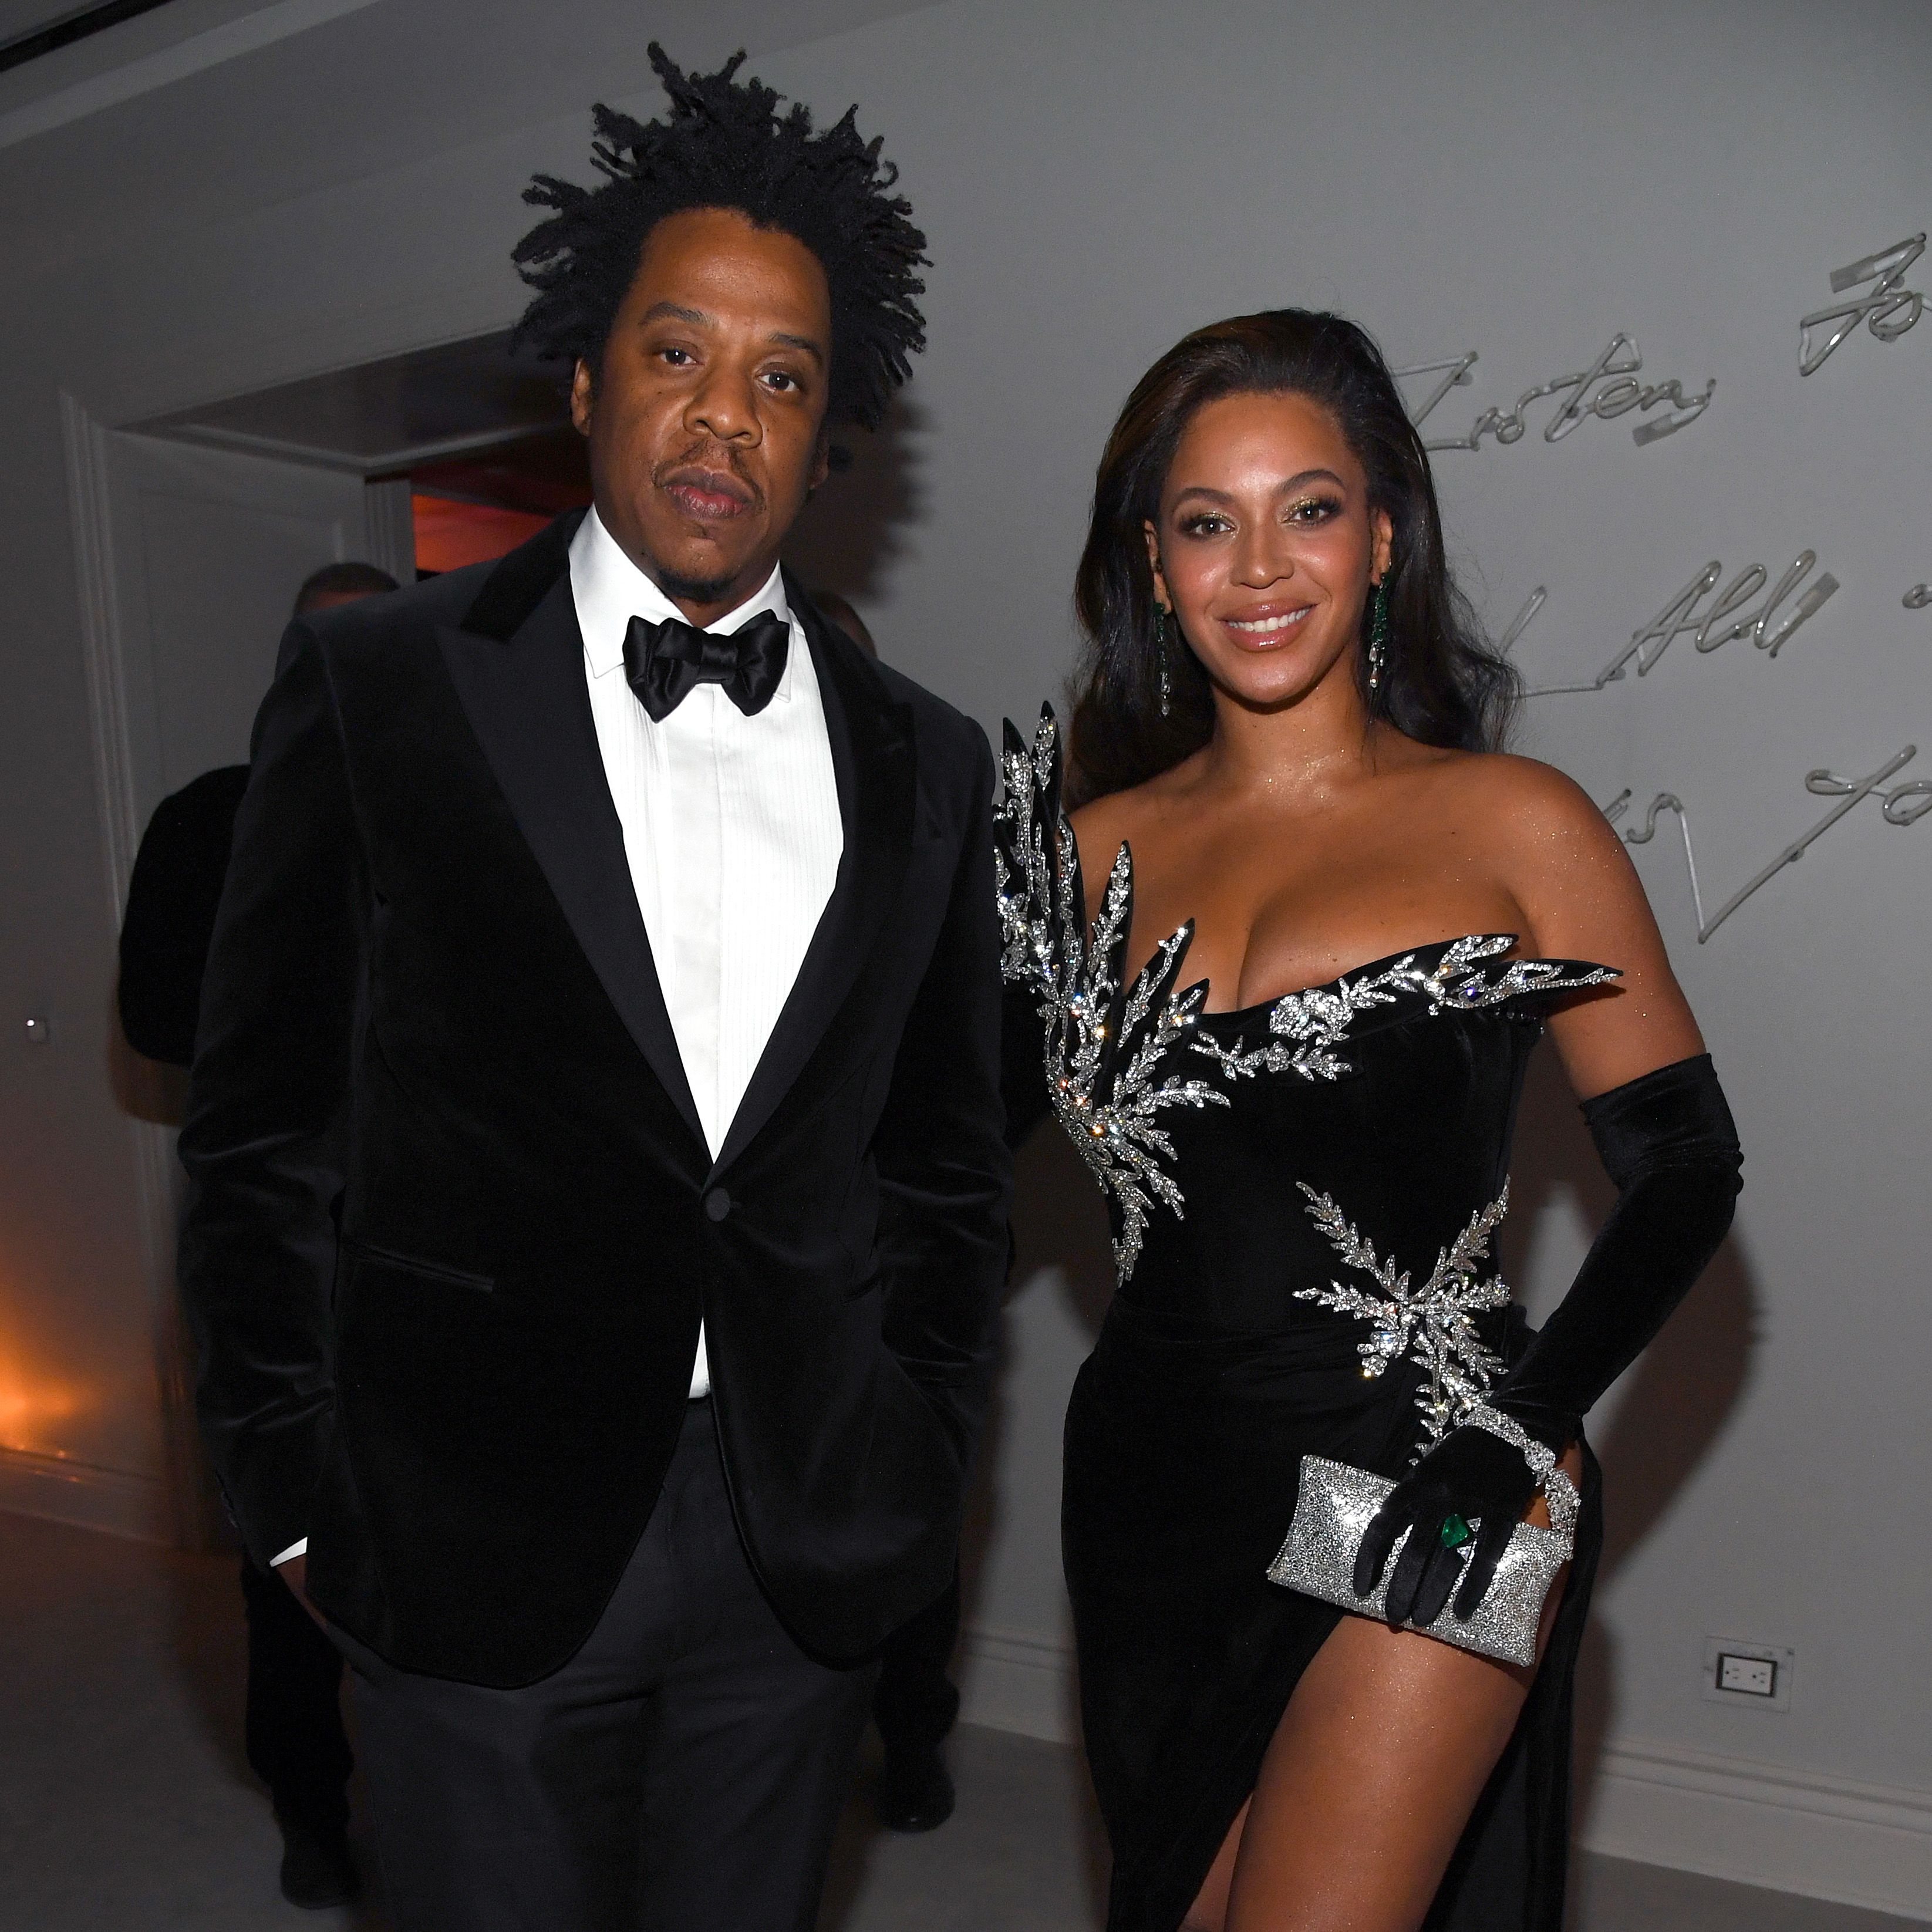 Jay-Z's Private Birthday Party with Beyonce: Photo 783151, Beyonce  Knowles, Jay Z Photos